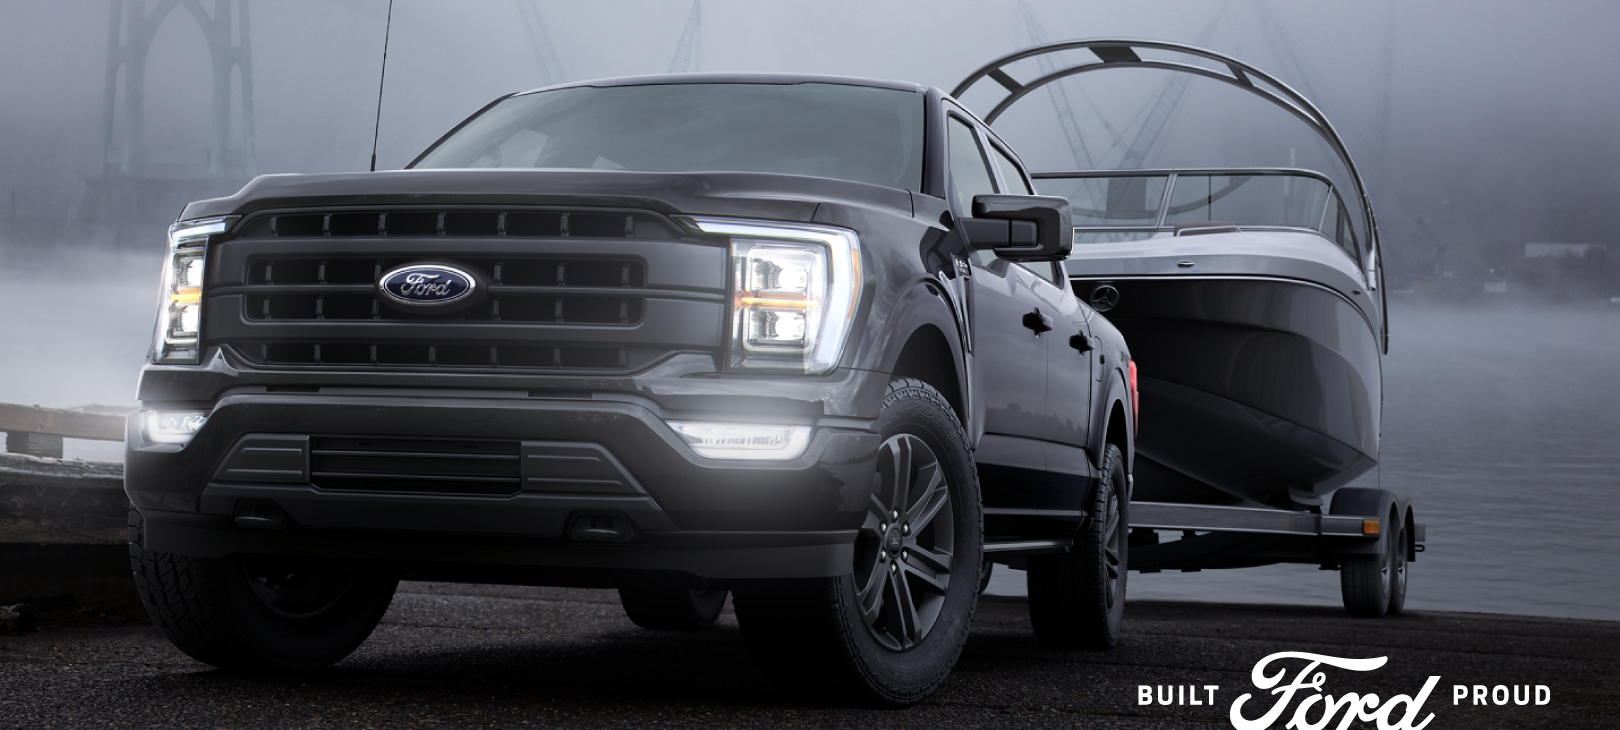 2021 F-150: Tougher Than Before. Smarter Than Ever.